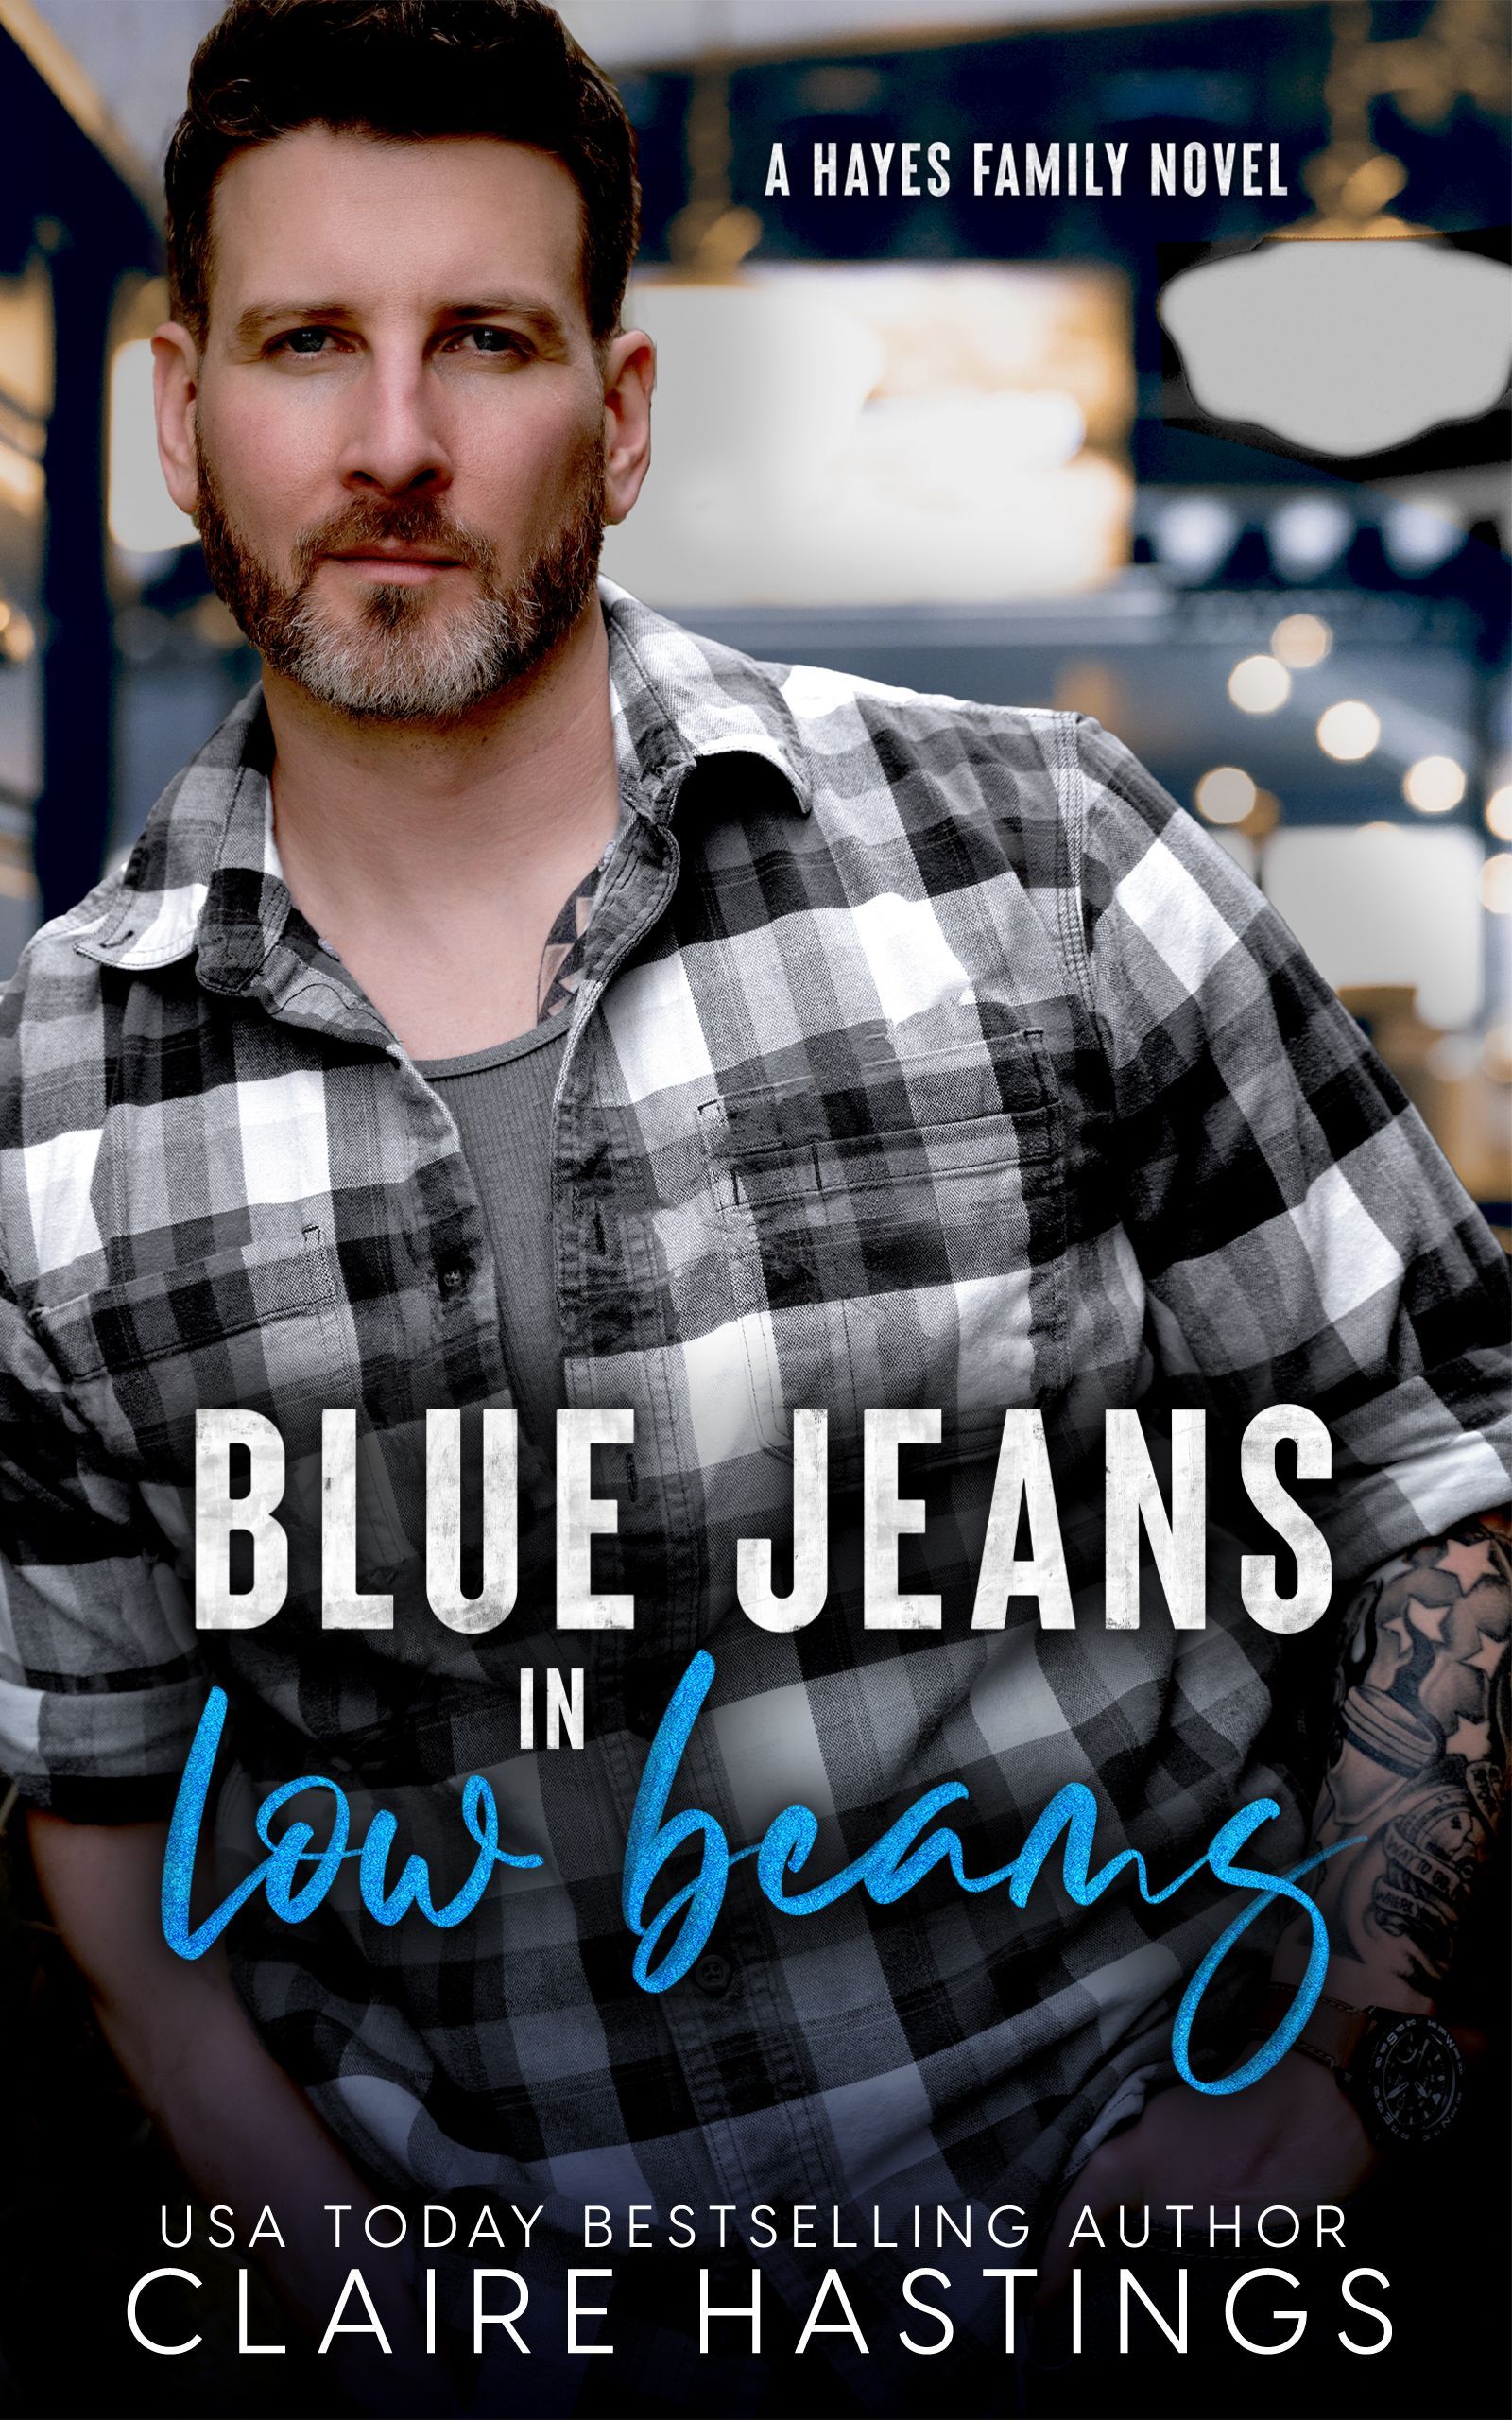 A man in a plaid shirt is on the cover of a book called Blue Jeans in Low Beams by Claire Hastings.